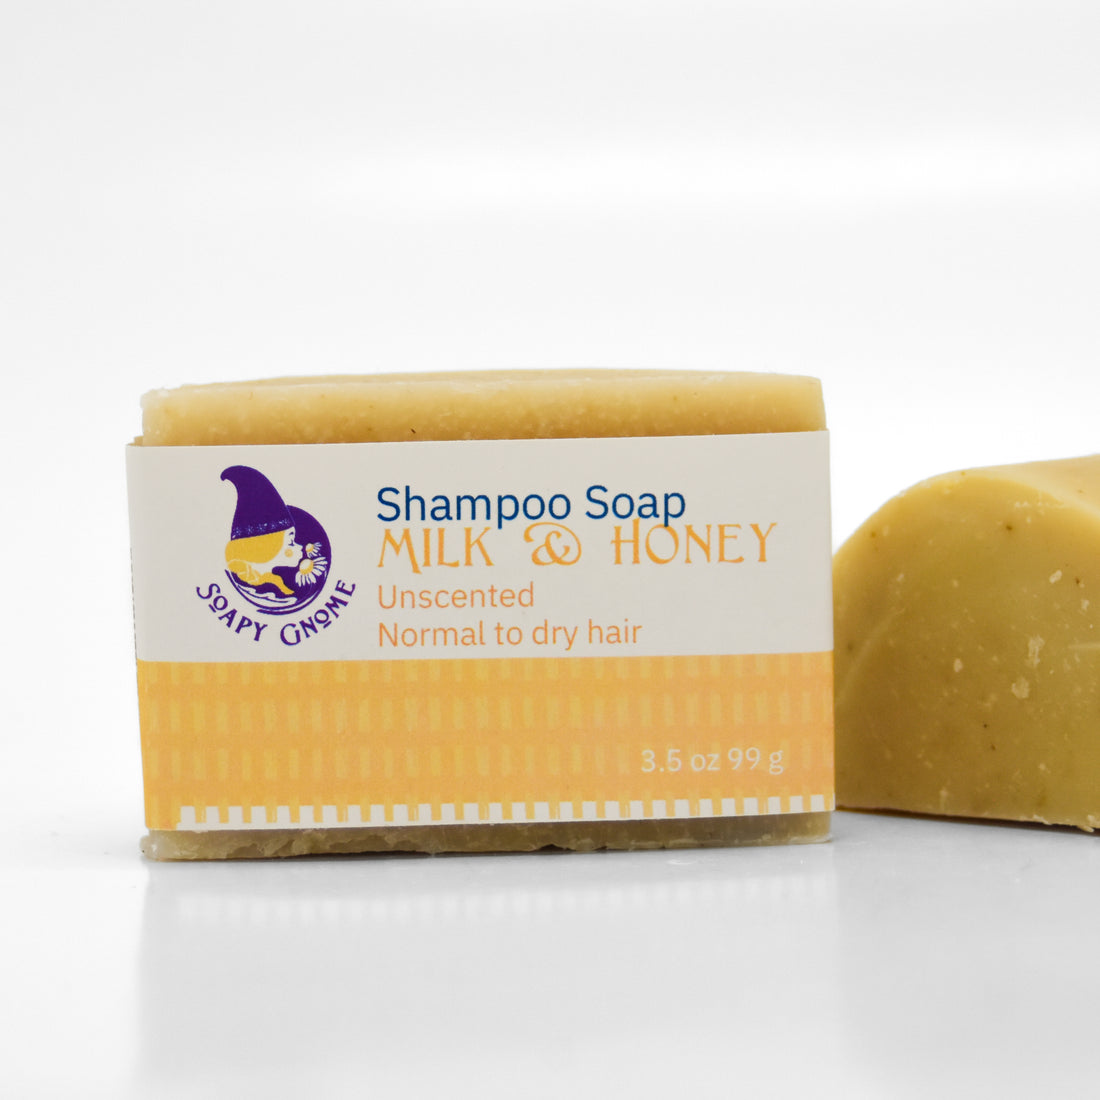 Milk and Honey Unscented Shampoo Soap